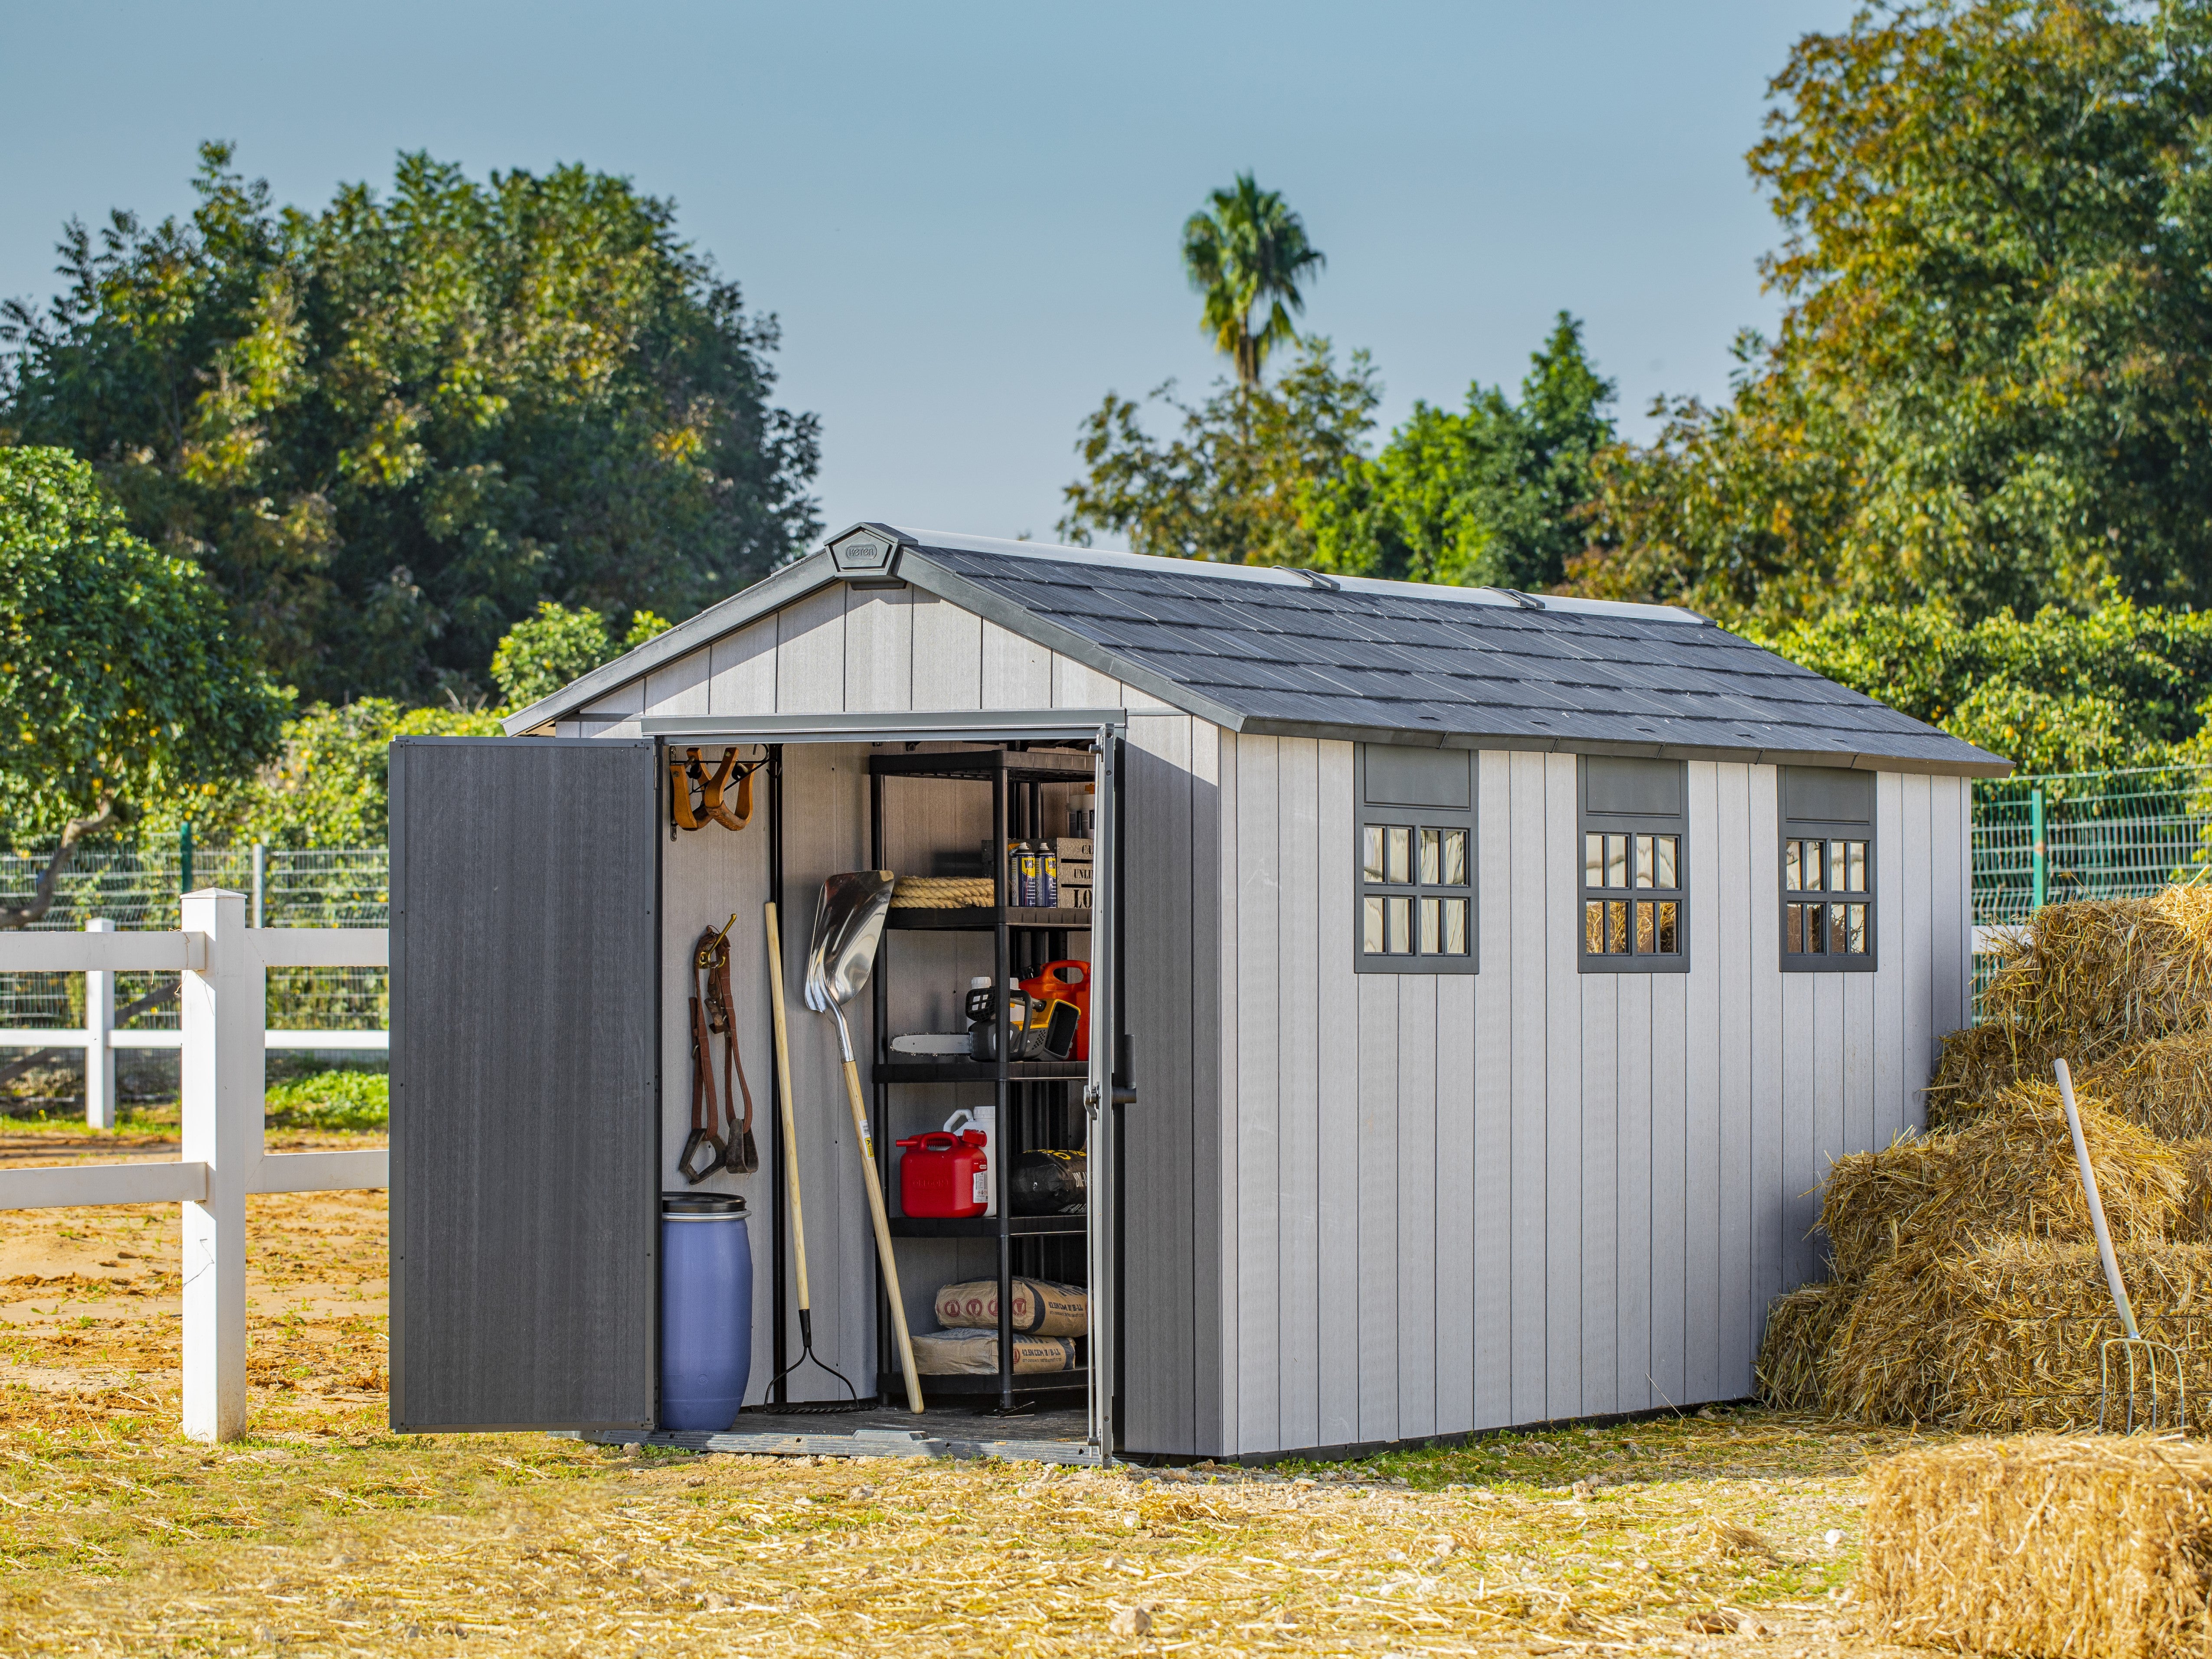 Keter Oakland 7515 shed on sunny day with haybales